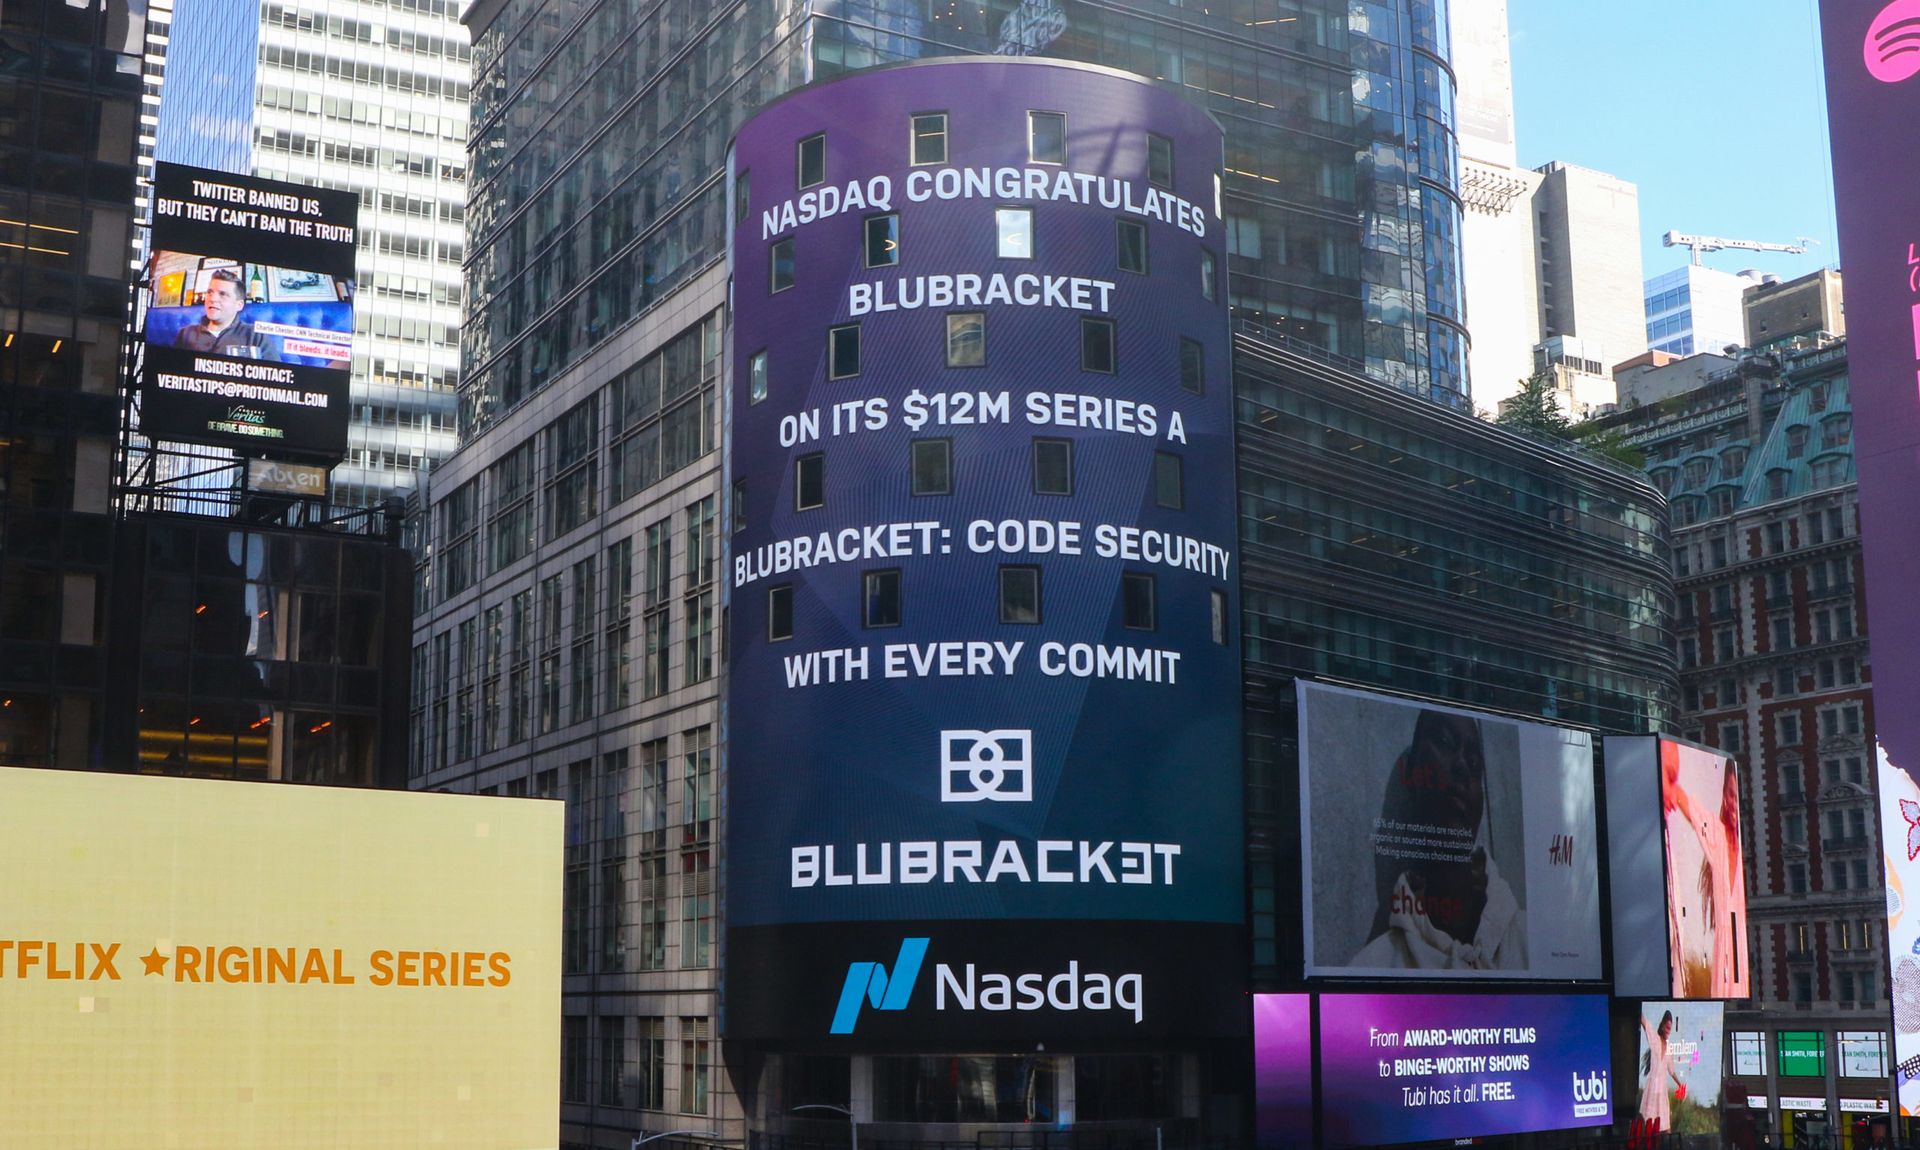 BluBracket got a congratulations by NASDAQ after its Series A funding, which the company will use to expand operations. (BlueBracket)